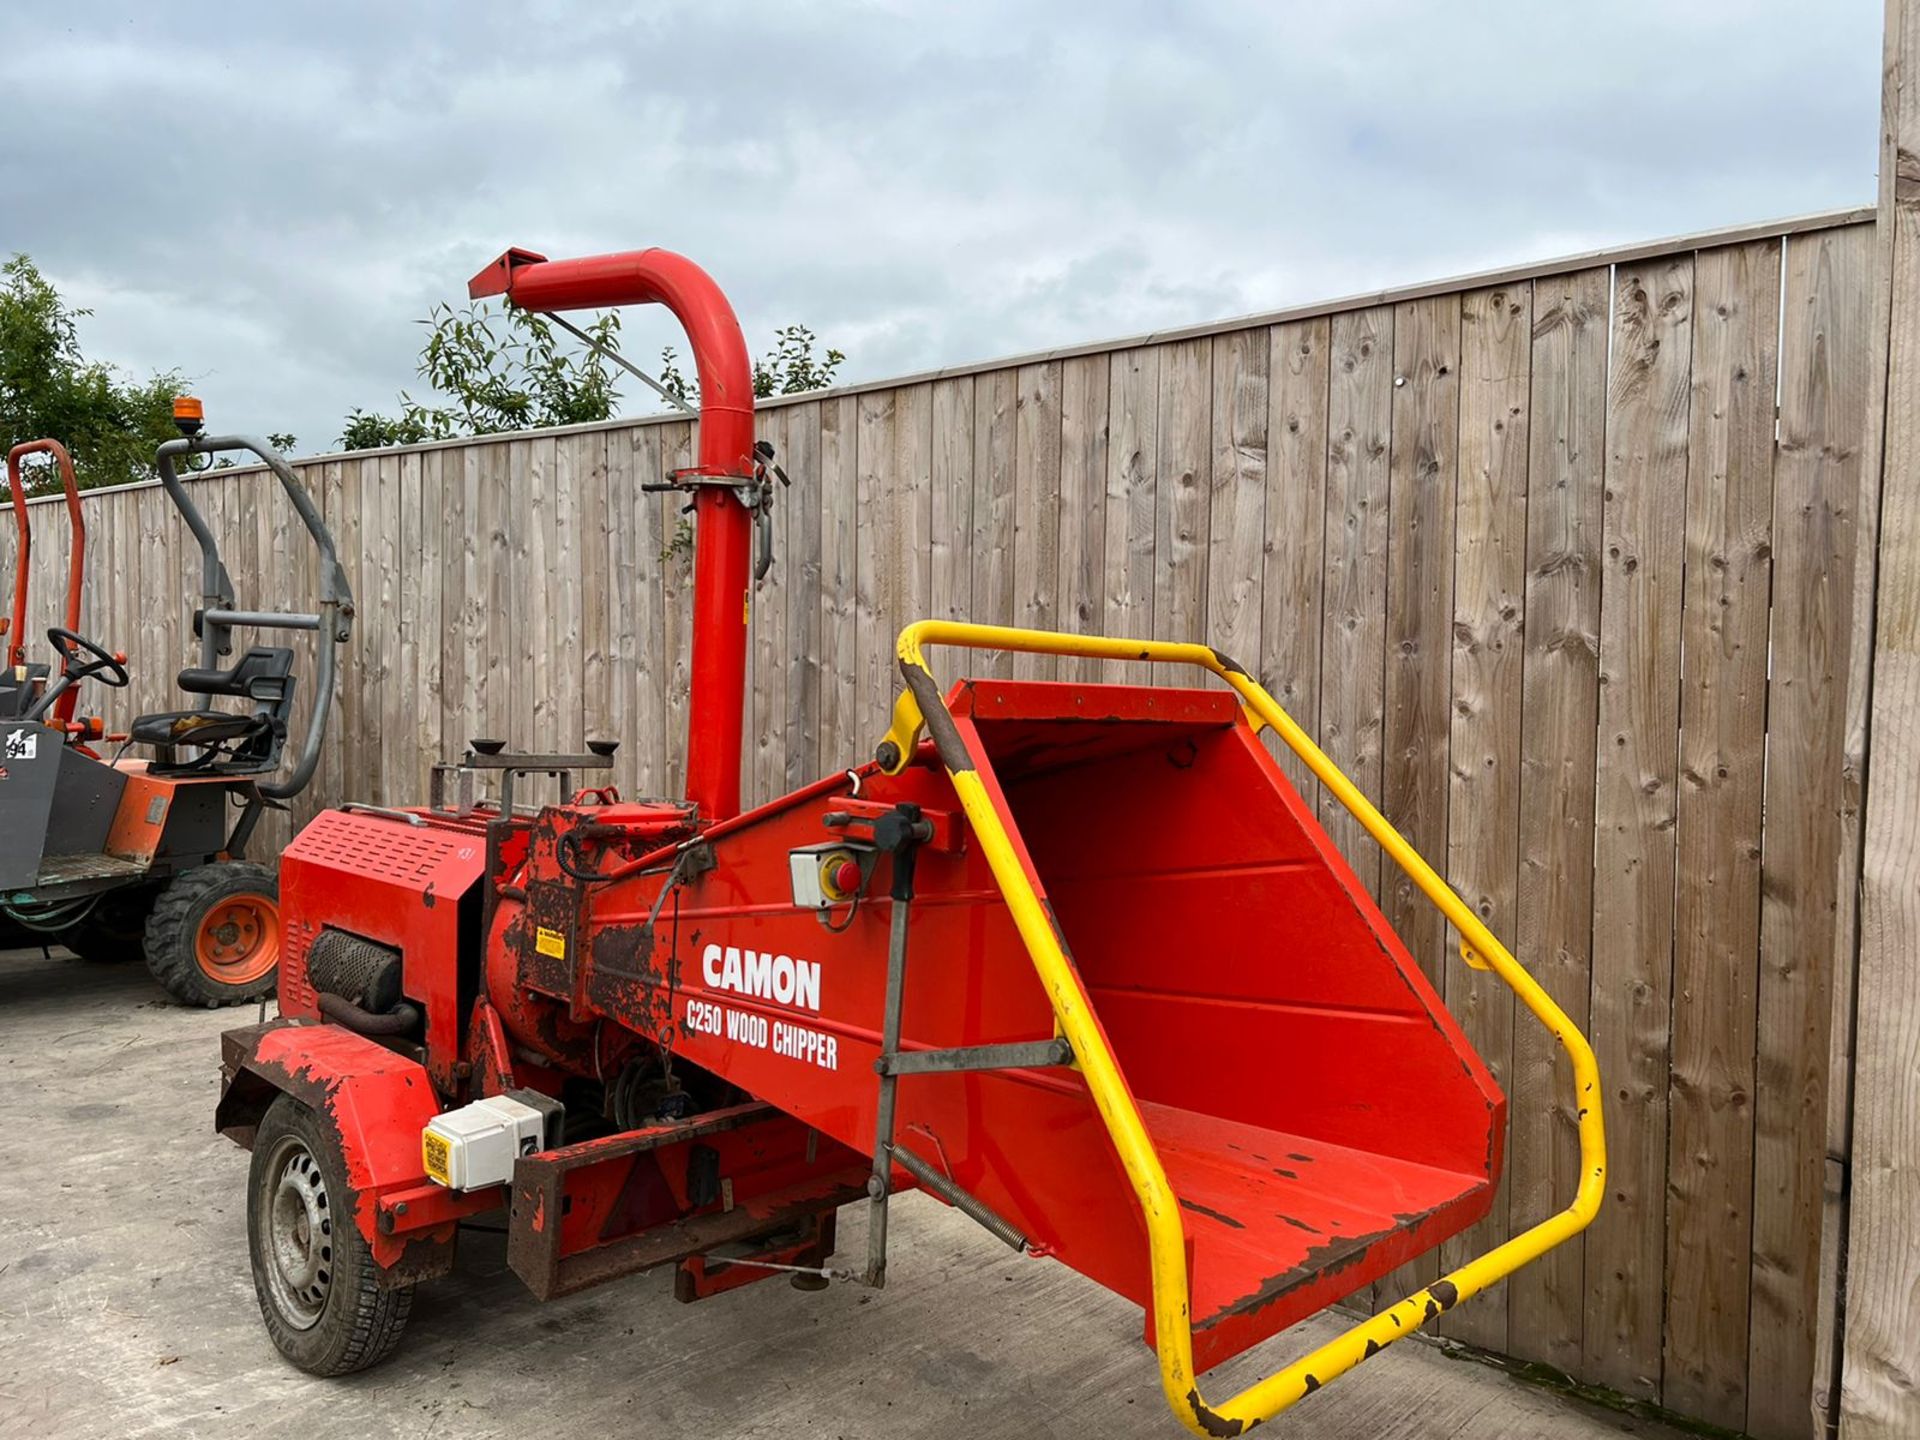 CAMON DIESEL WOOD CHIPPER LOCATION NORTH YORKSHIRE. - Image 5 of 12